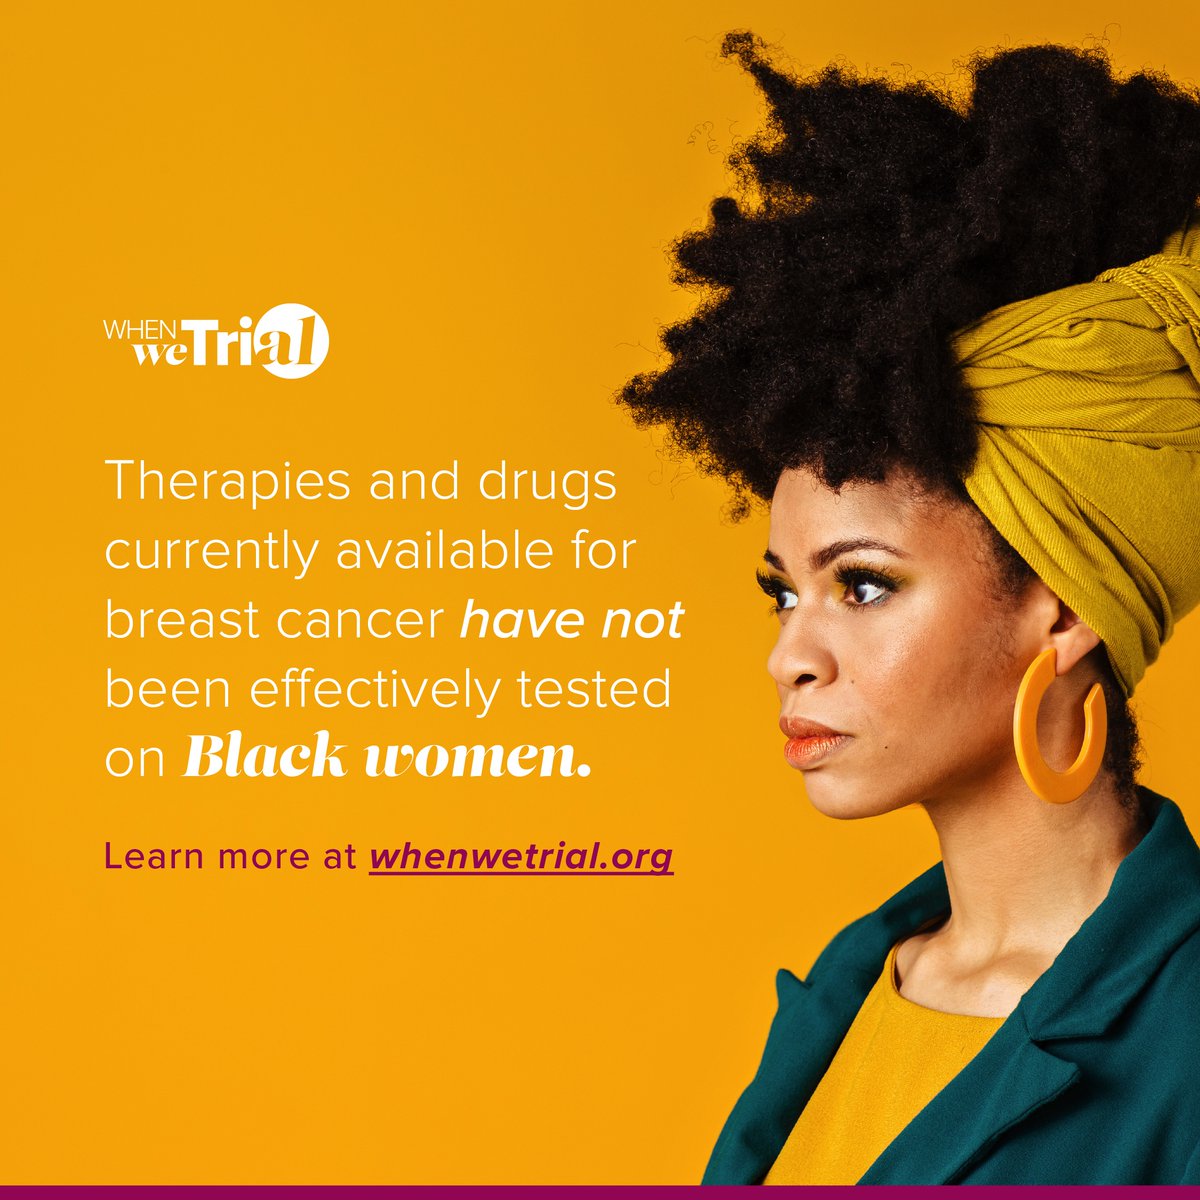 The statistics that exist for Black women with breast cancer today don’t have to stay the same tomorrow. Be part of the change at whenwetrial.org